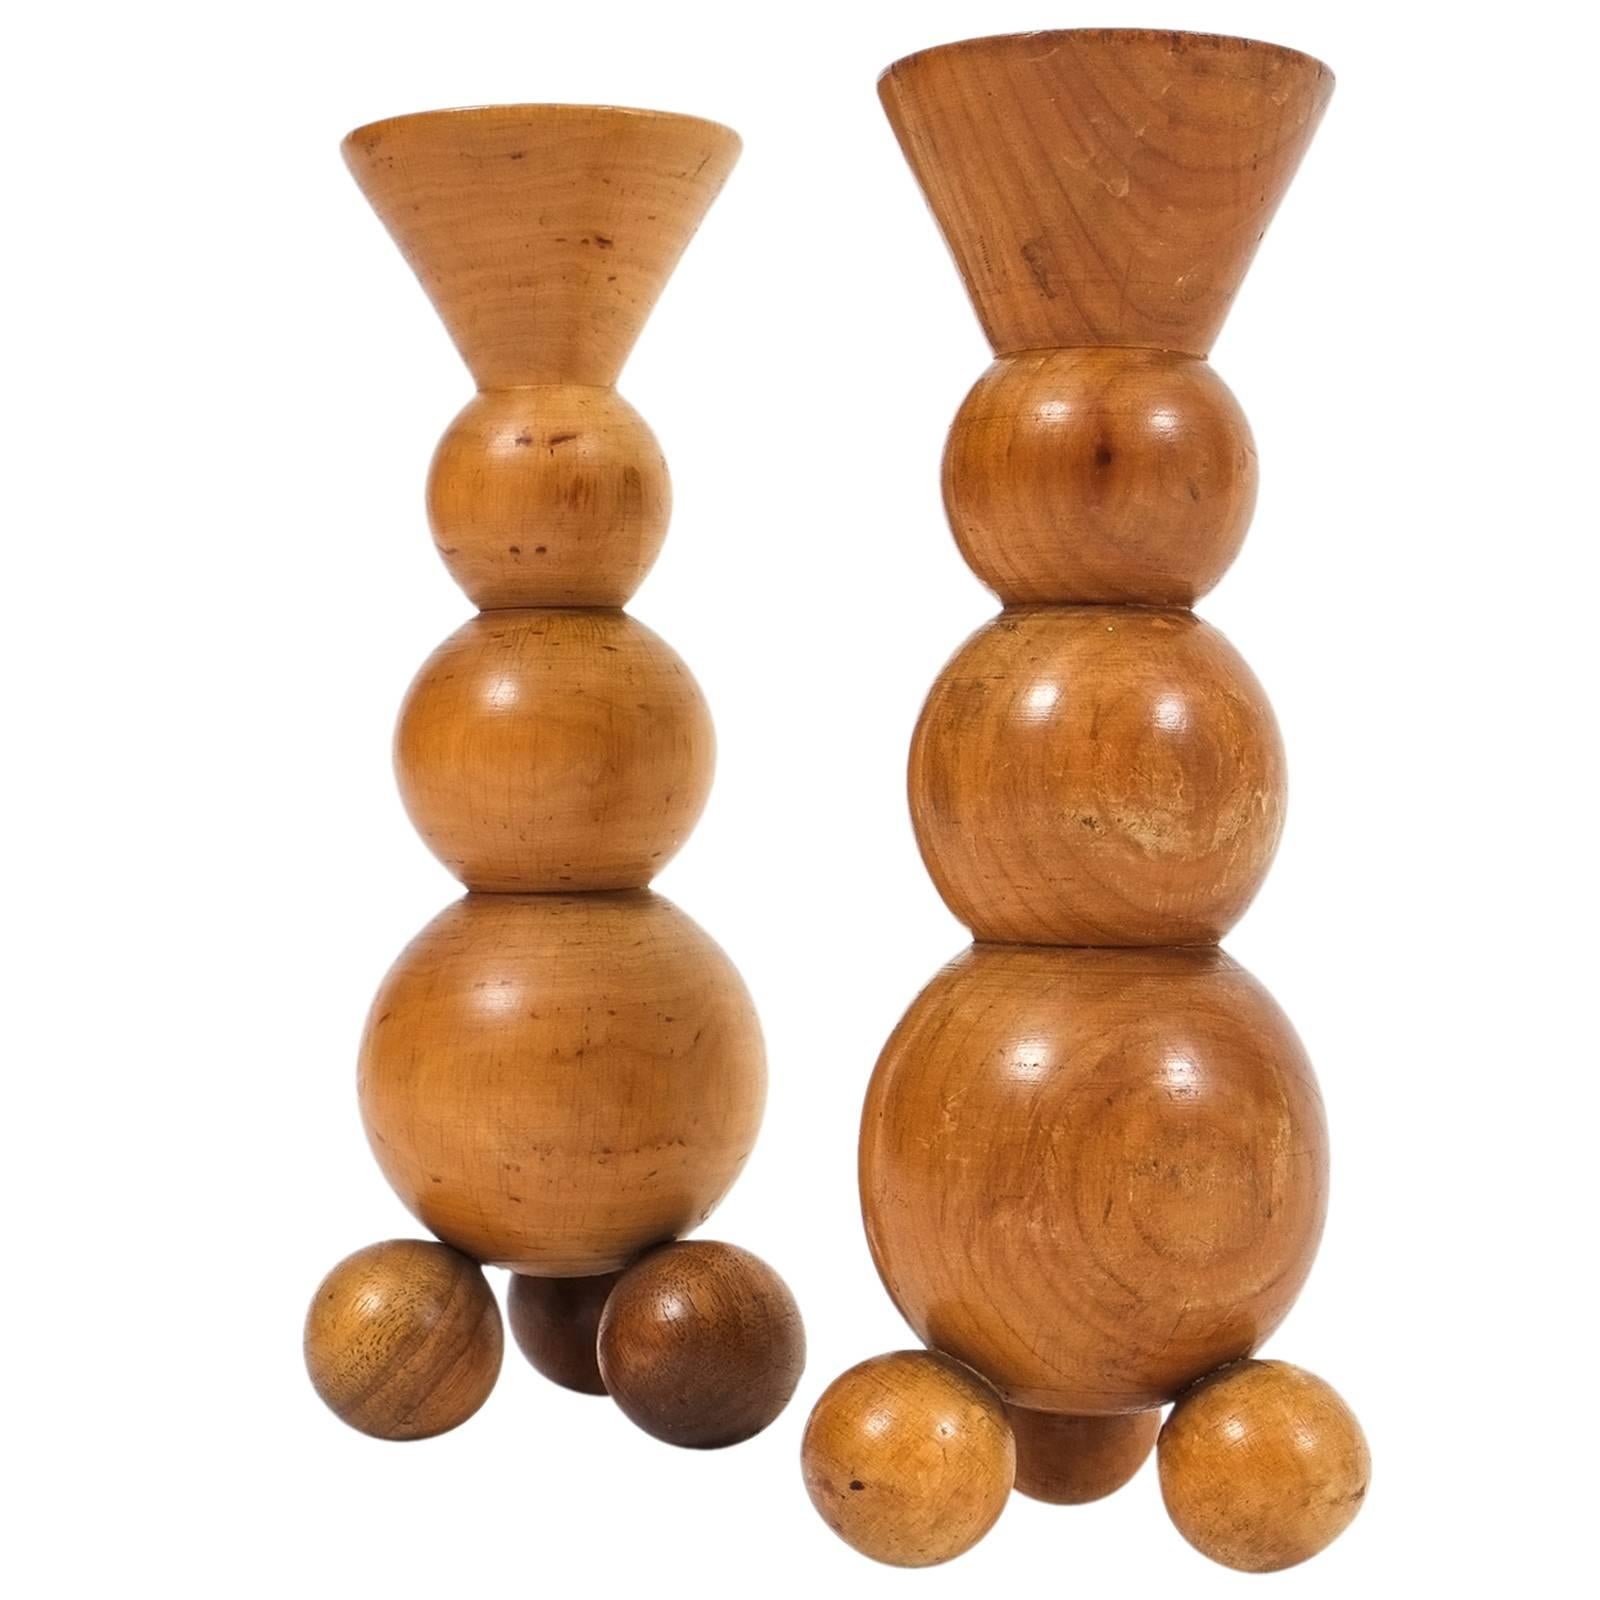 Pair of Art Deco Candlesticks Made from Wood